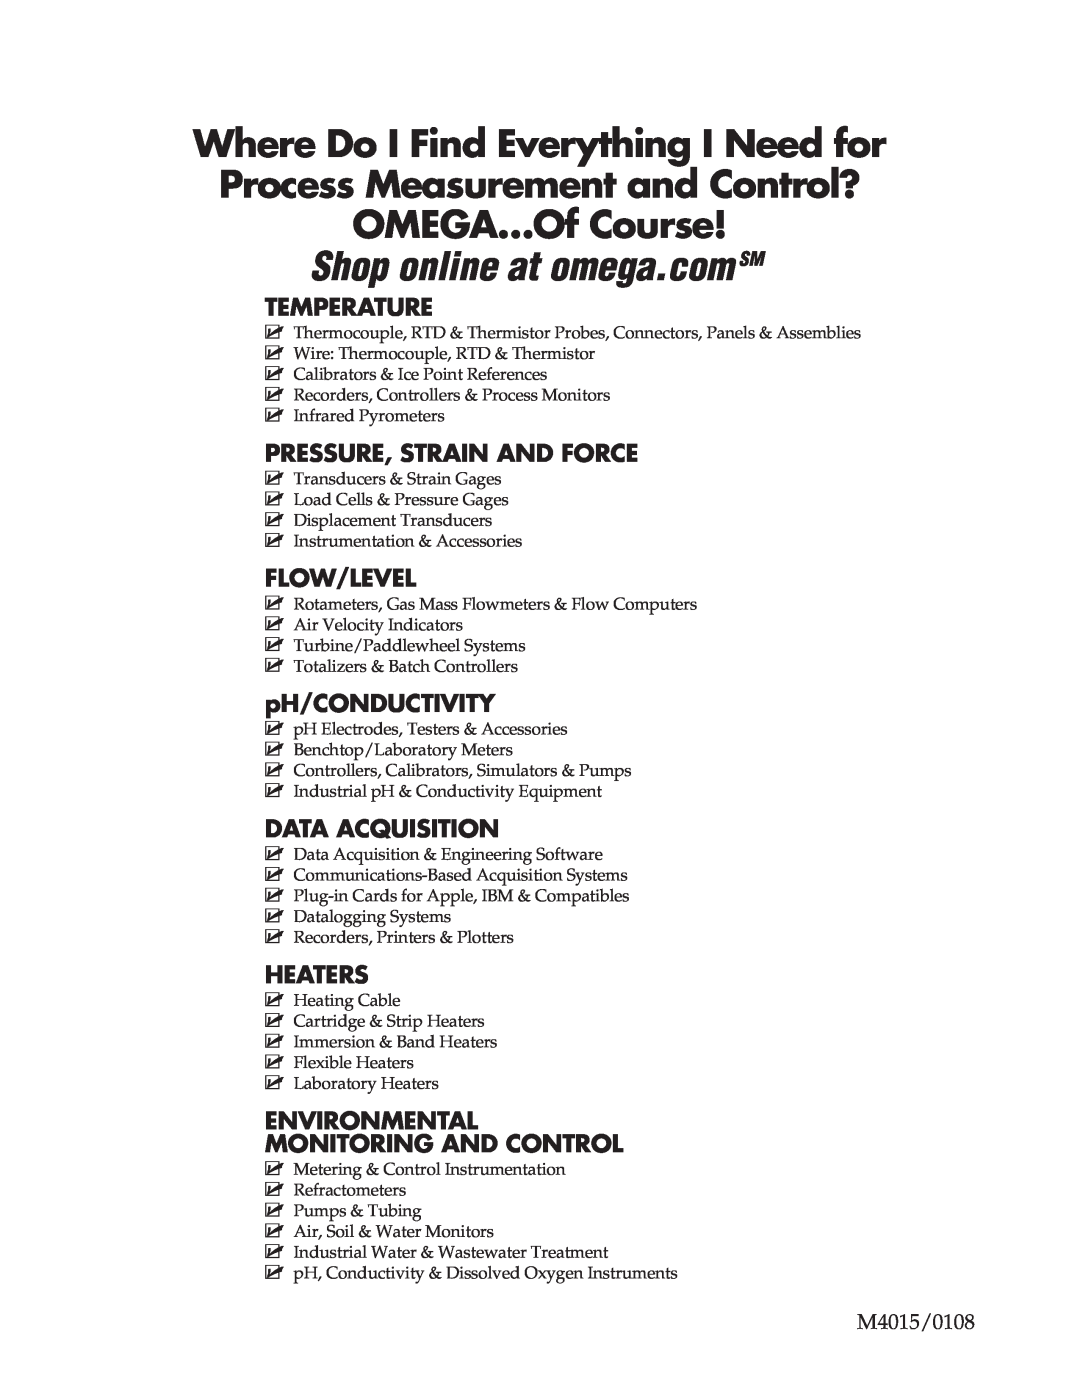 Omega OS137 manual OMEGA…Of Course, Temperature, Pressure, Strain And Force, Flow/Level, pH/CONDUCTIVITY, Data Acquisition 